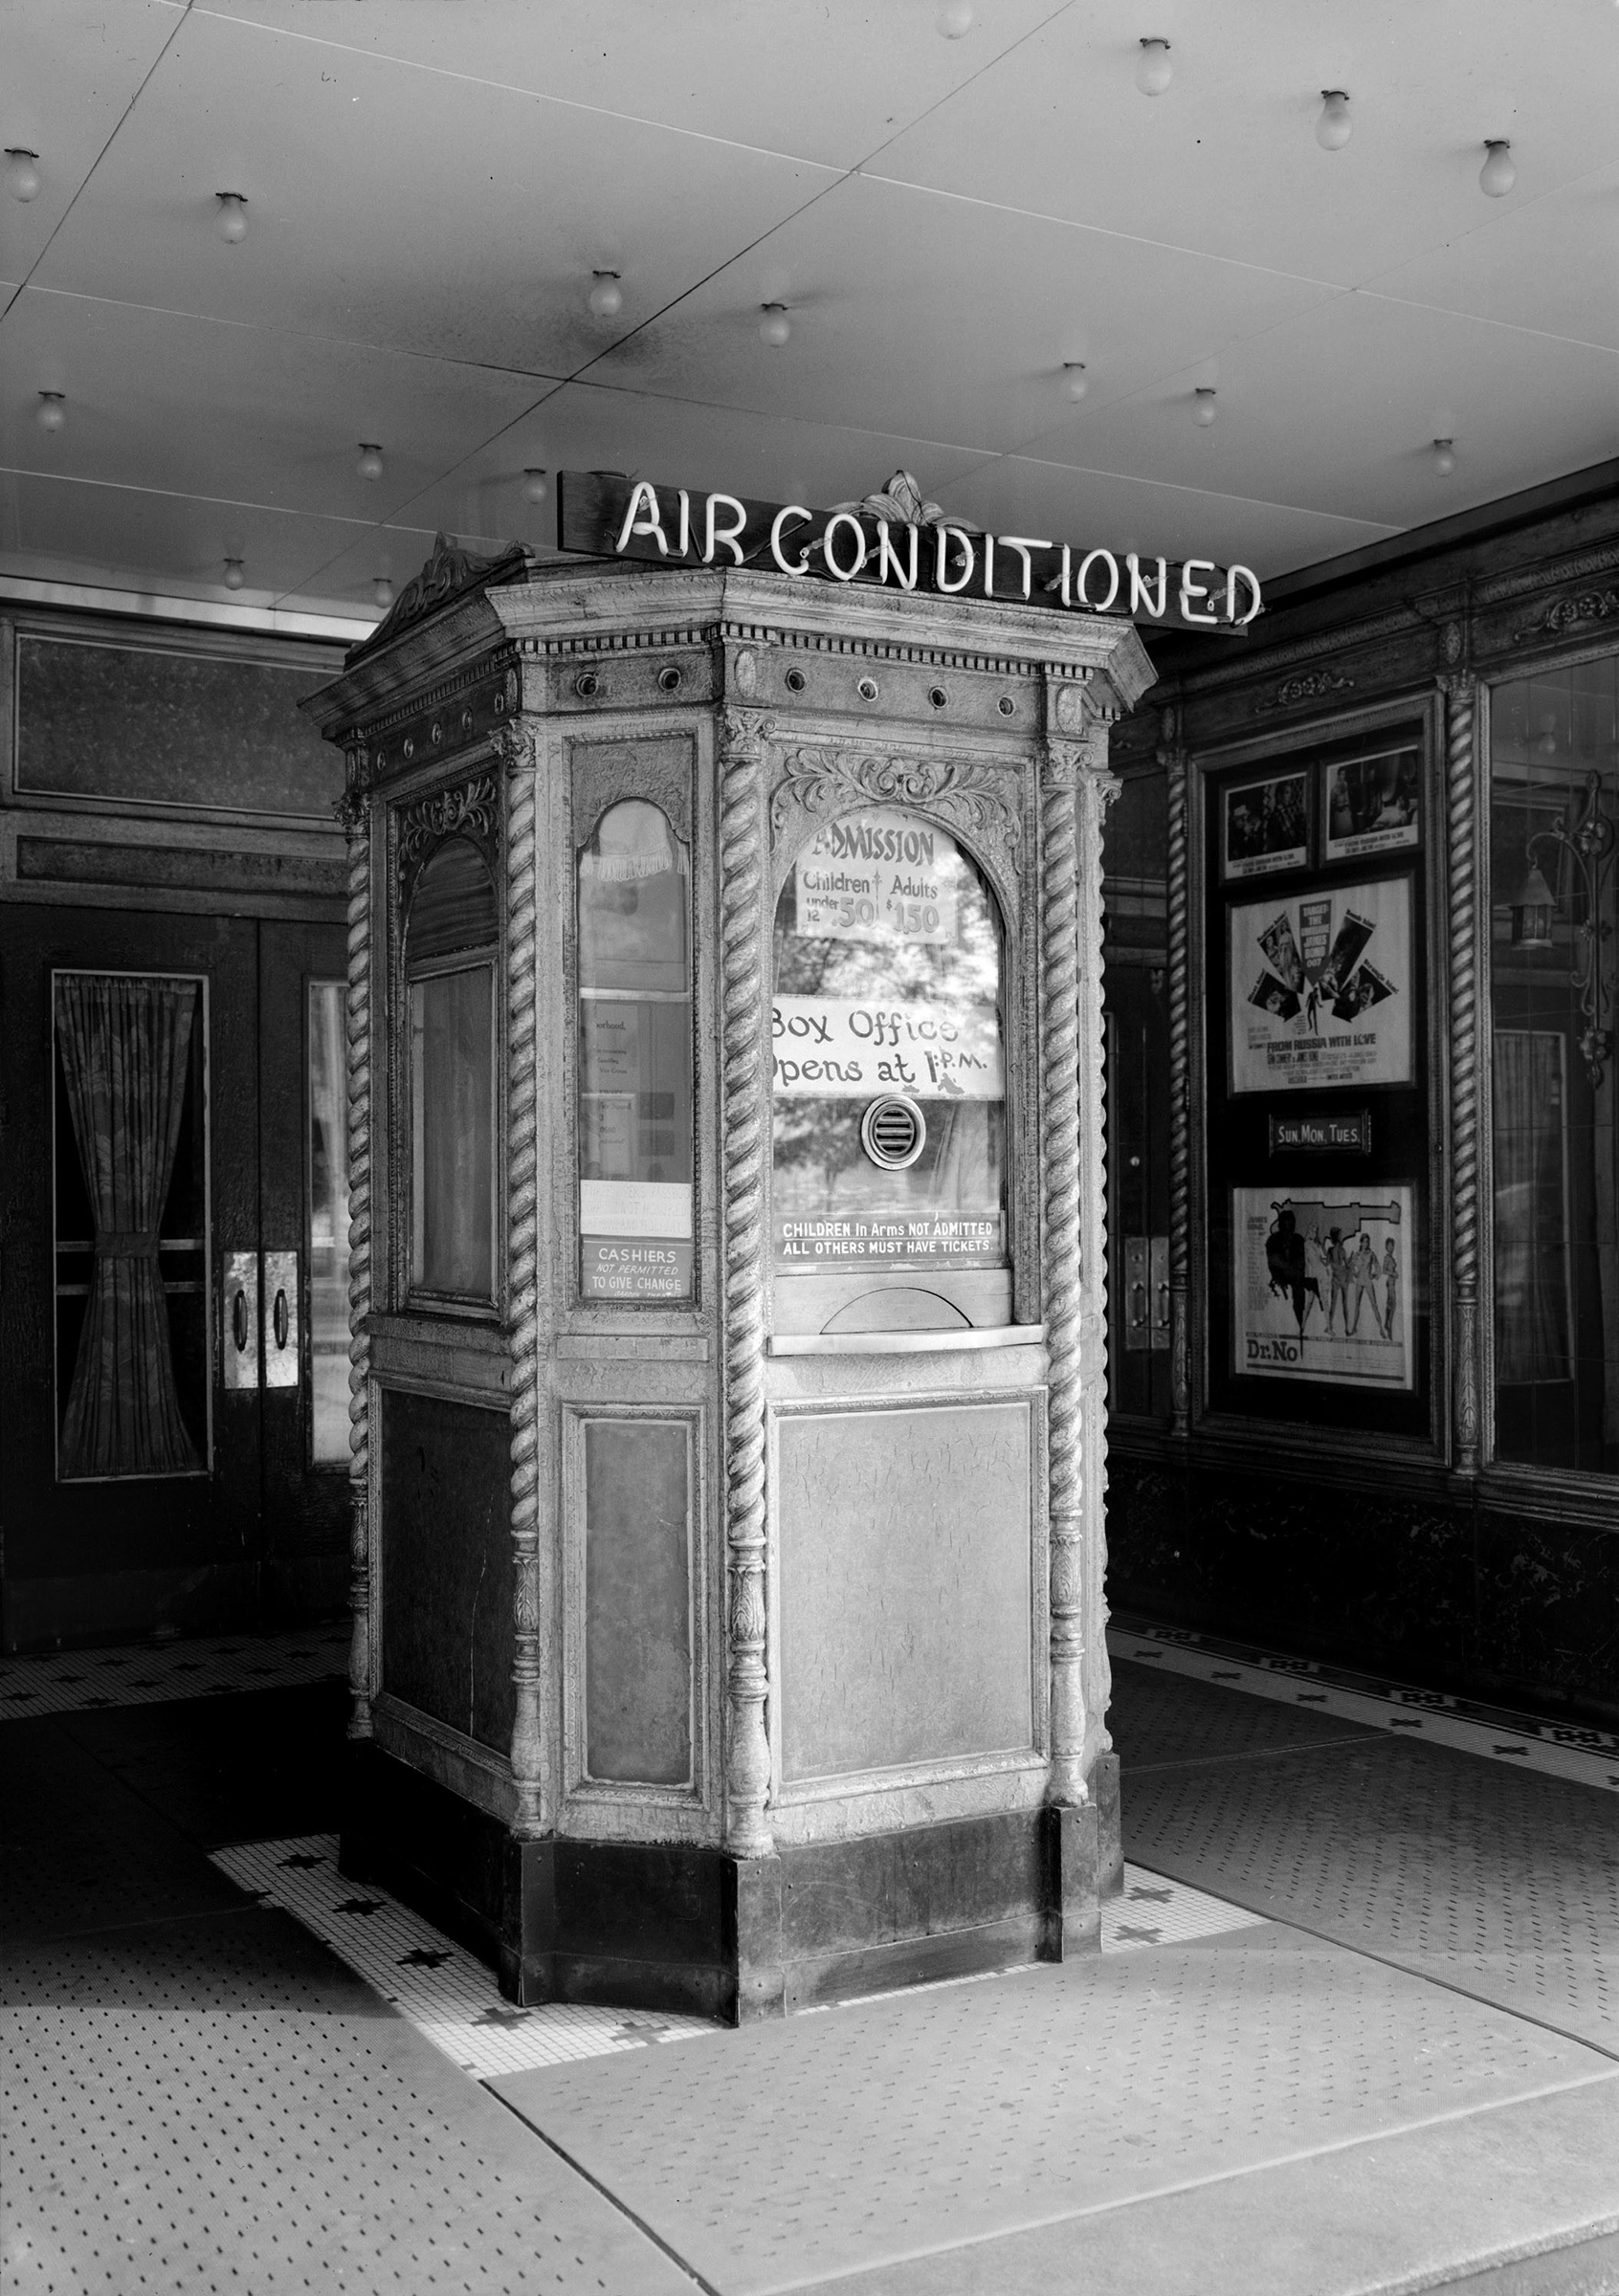 A theater's lobby advertises air conditioning to prospective movie-goers.